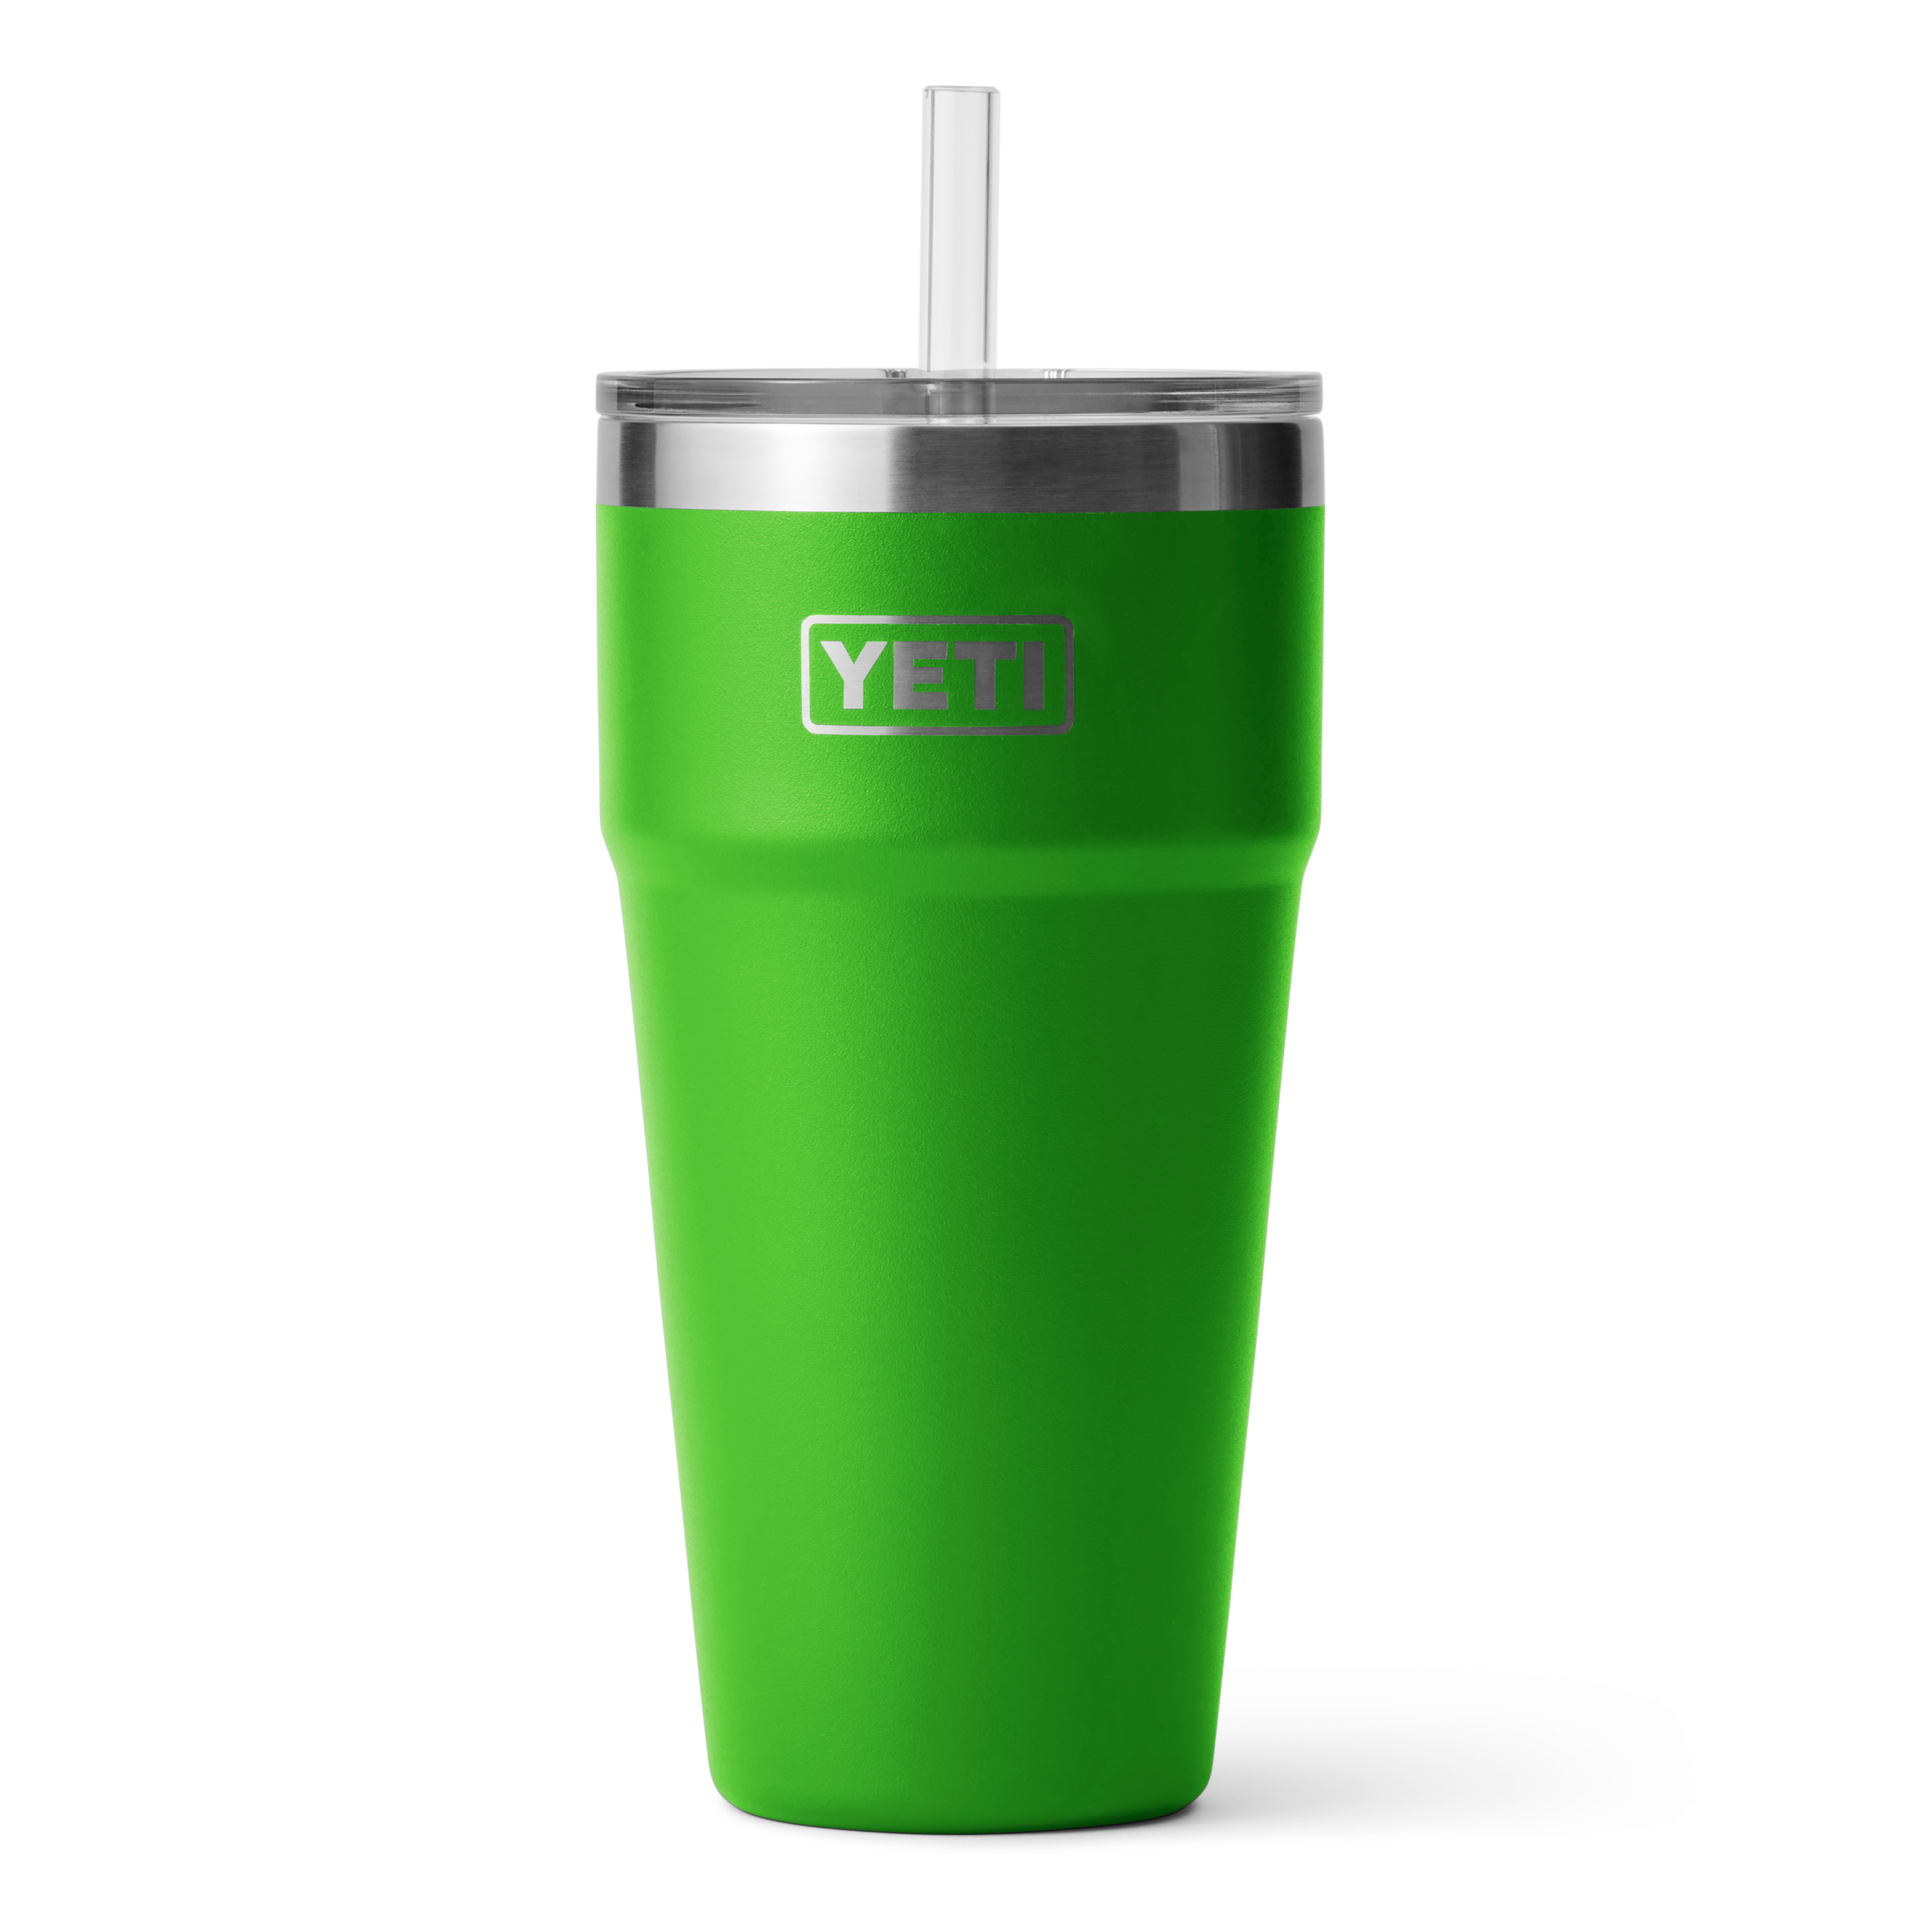 Yeti Rambler 26oz Stackable Cup with Straw Lid - Canopy Green